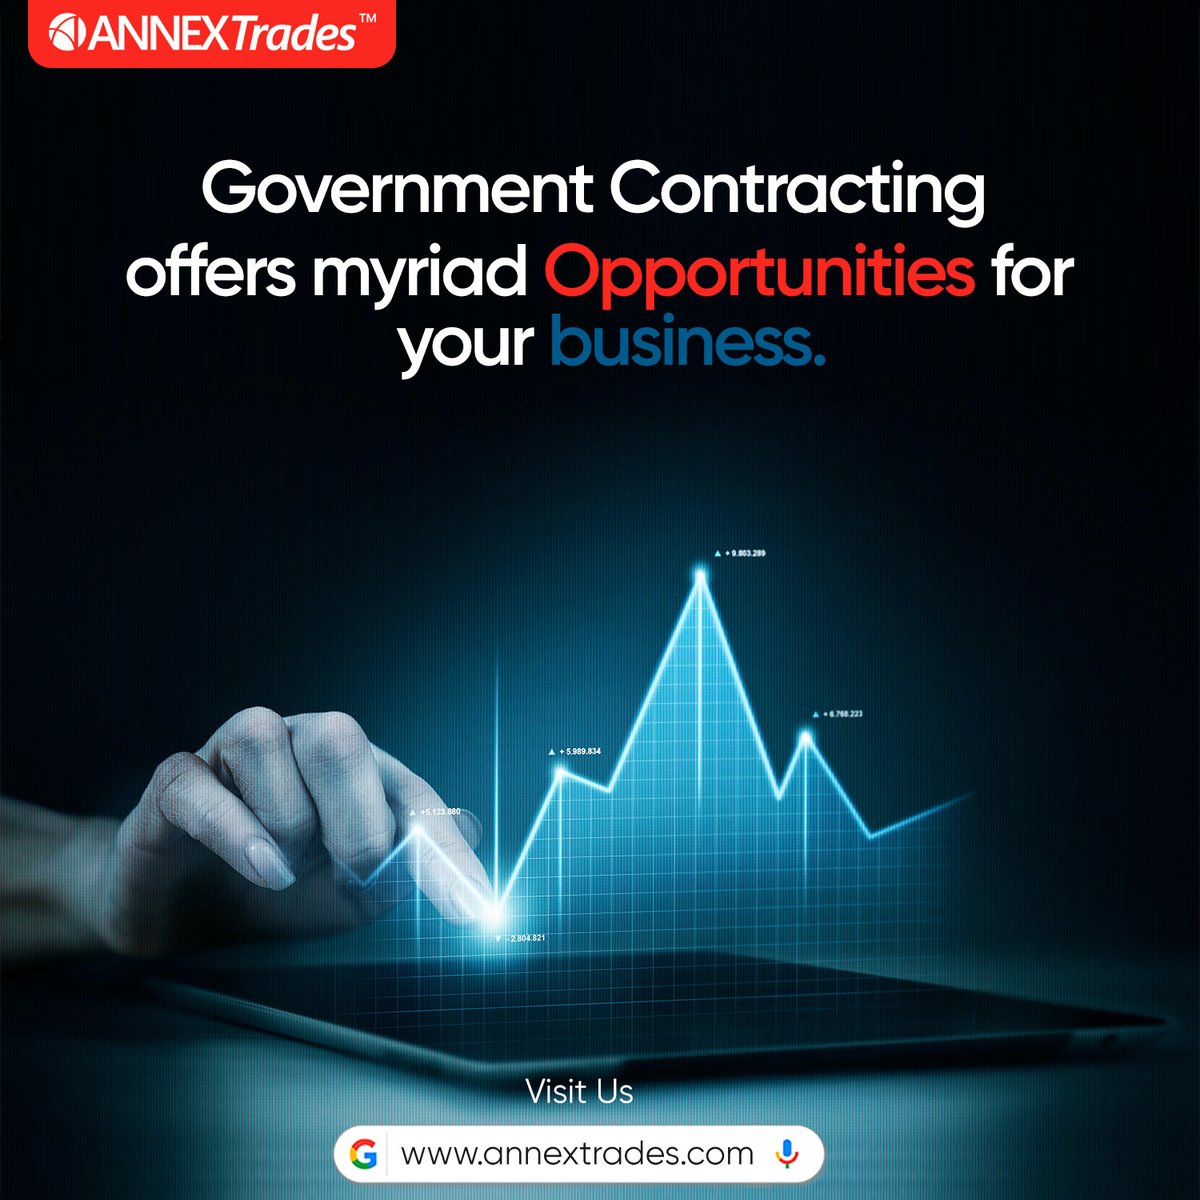 Discover limitless opportunities at annextrades.com

#governmentcontracts #businessgrowth #opportunities #topindustries #contracting #federalcontracts #usa #usnews 
#governmentcontracts #govcon #contracting #governmentcontracting #usbiz #governmentcontractor #govcon